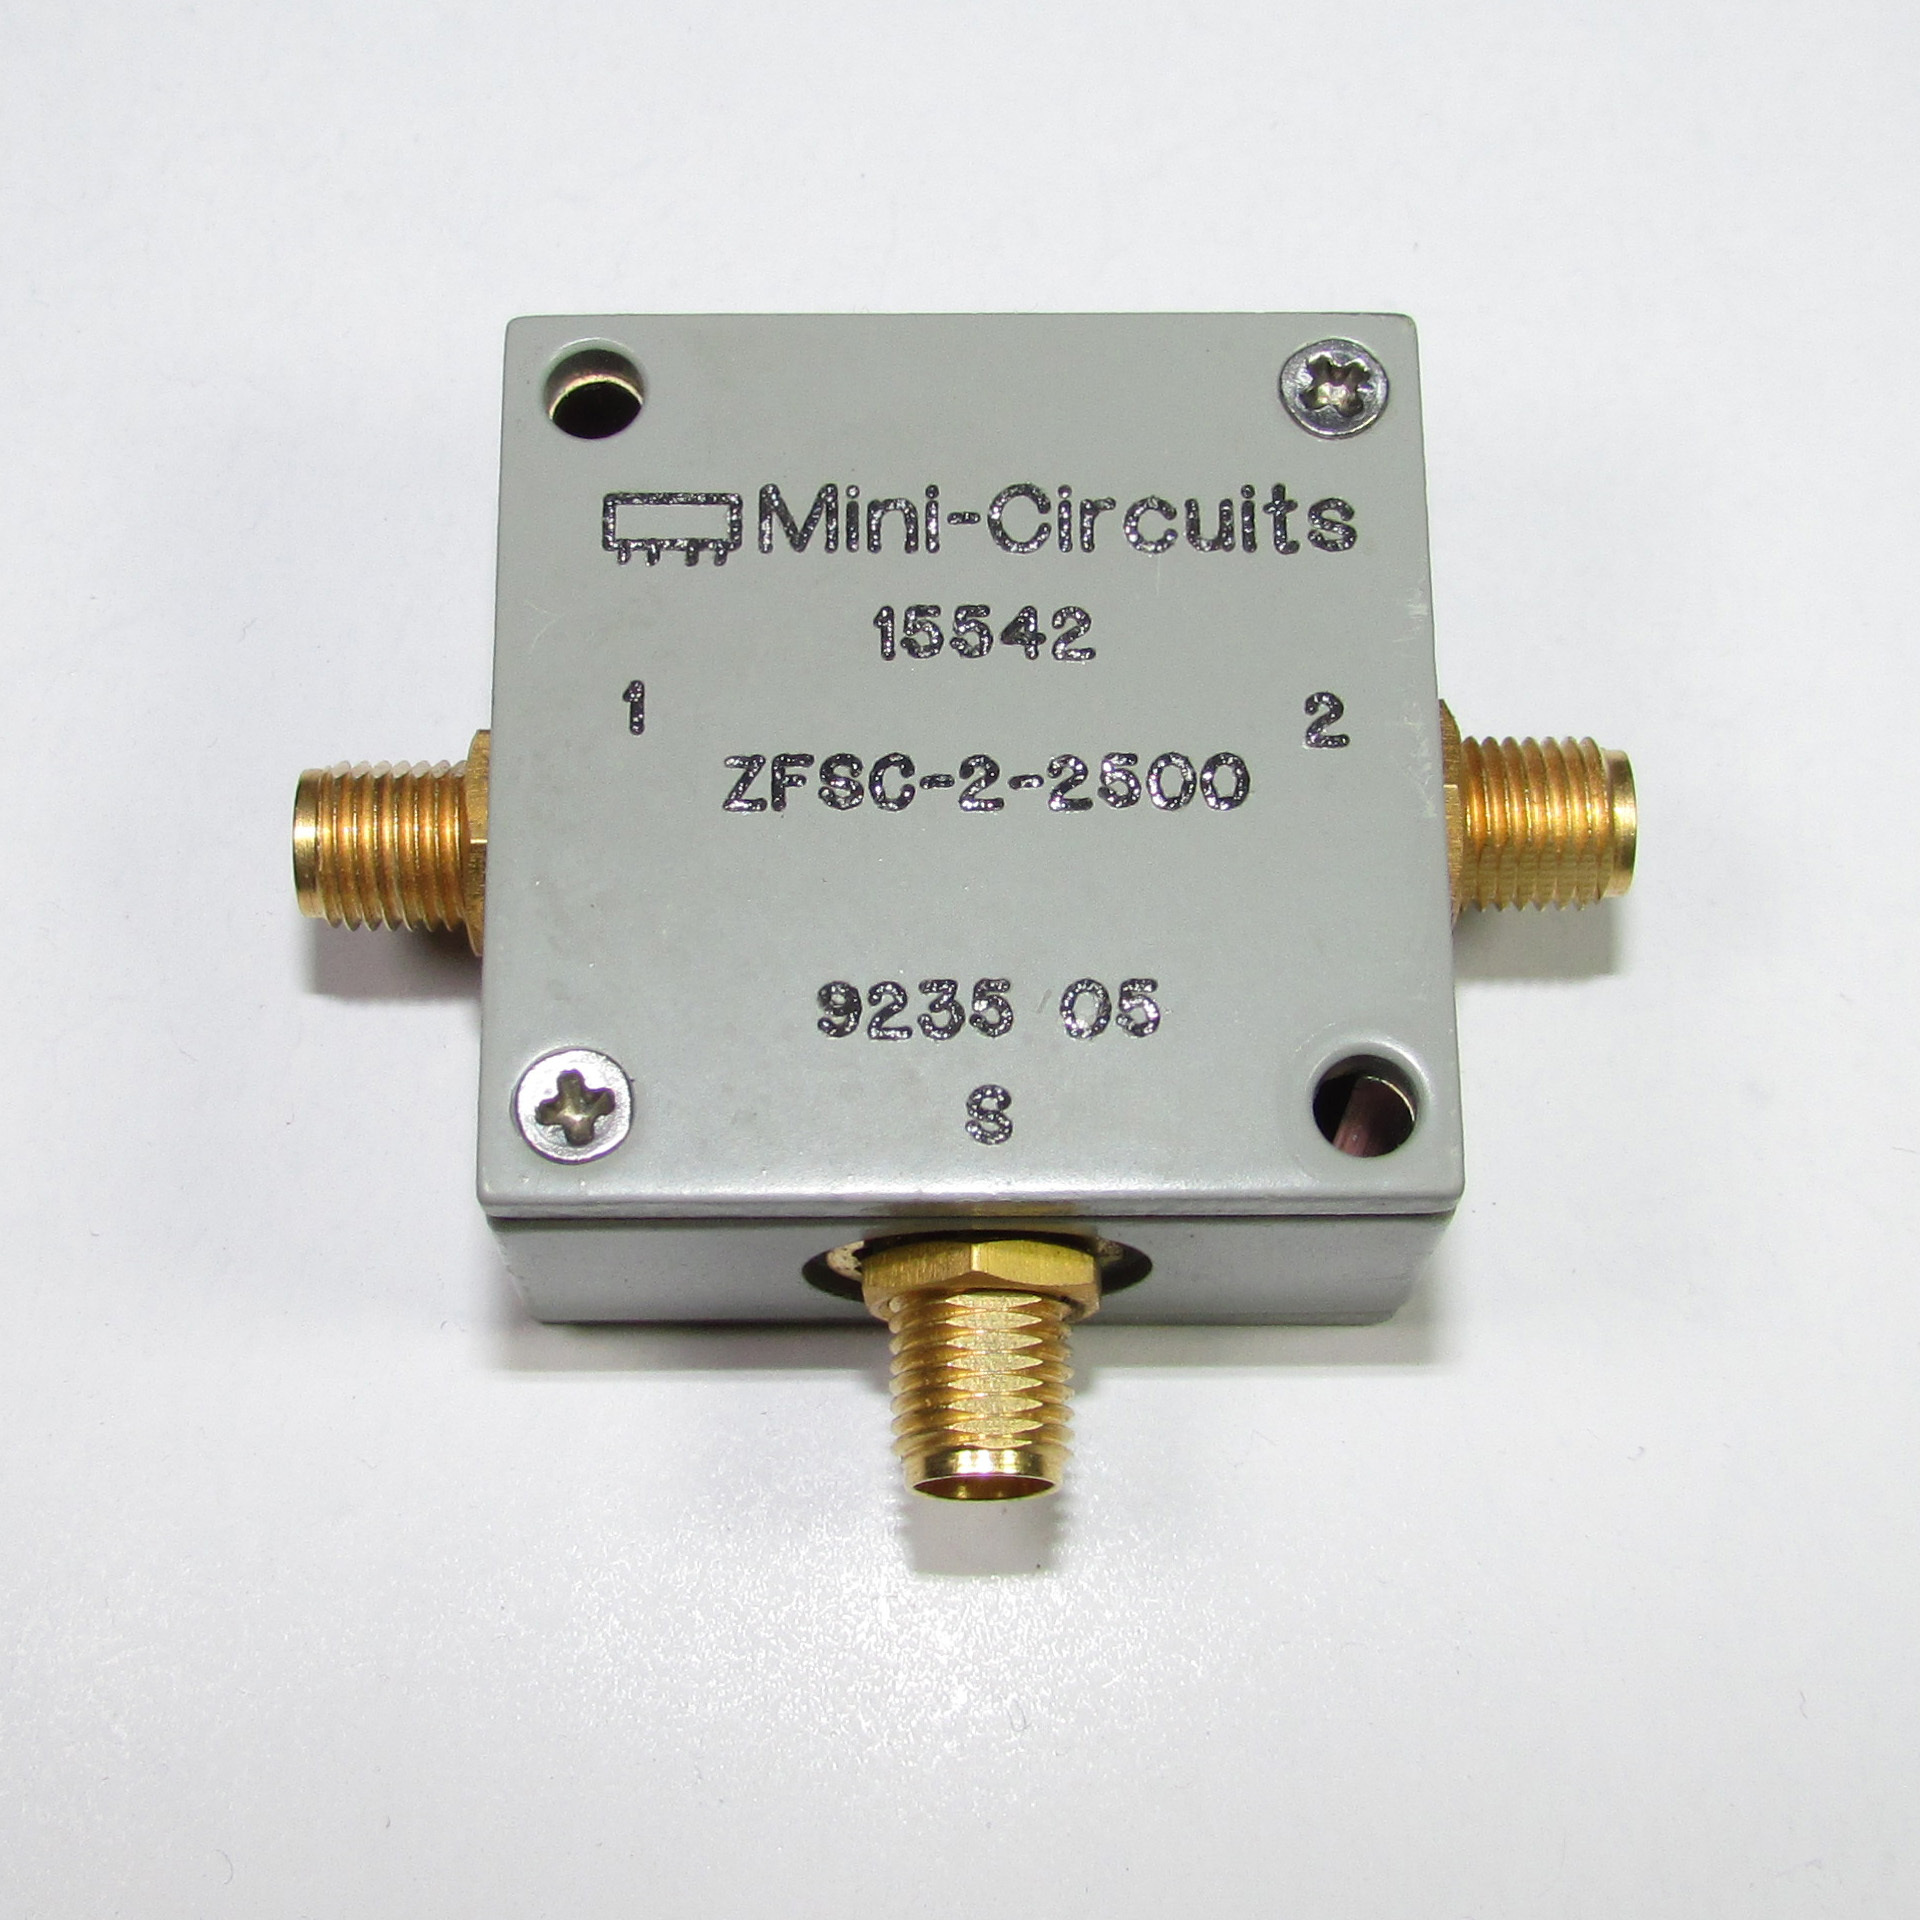 Mini-Circuits ZFSC-2-2500 10-2500MHz SMA RF coaxial one minute two power divider